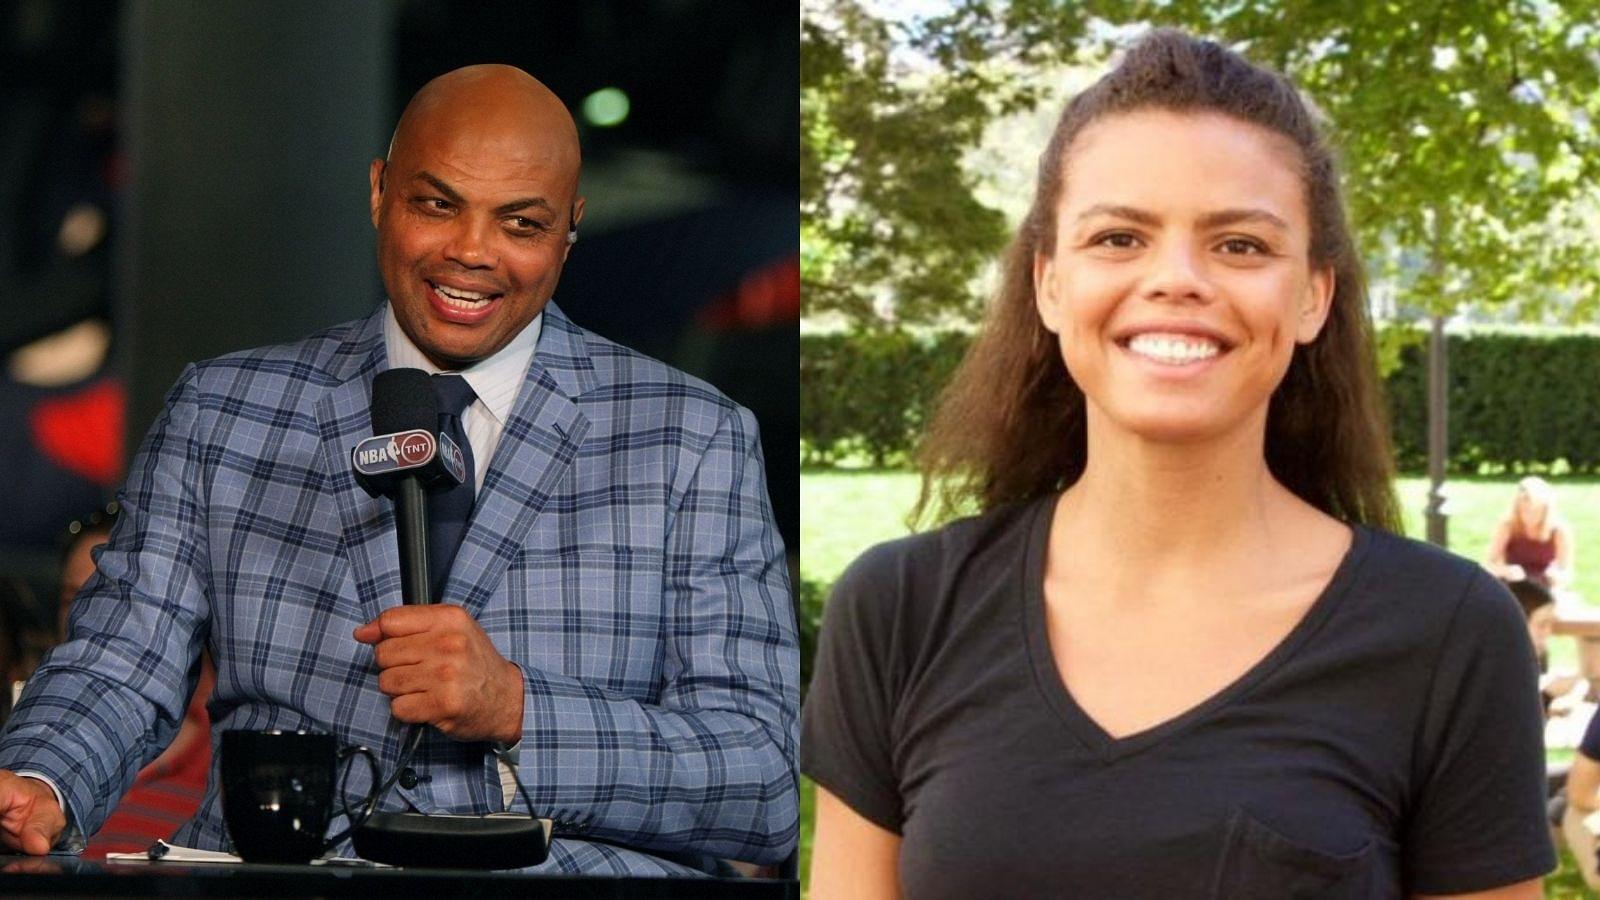 "'Women be milking that baby thing'? A sprained ankle is a spa treatment compared to childbirth": Charles Barkley 's daughter responds to his old disturbing video